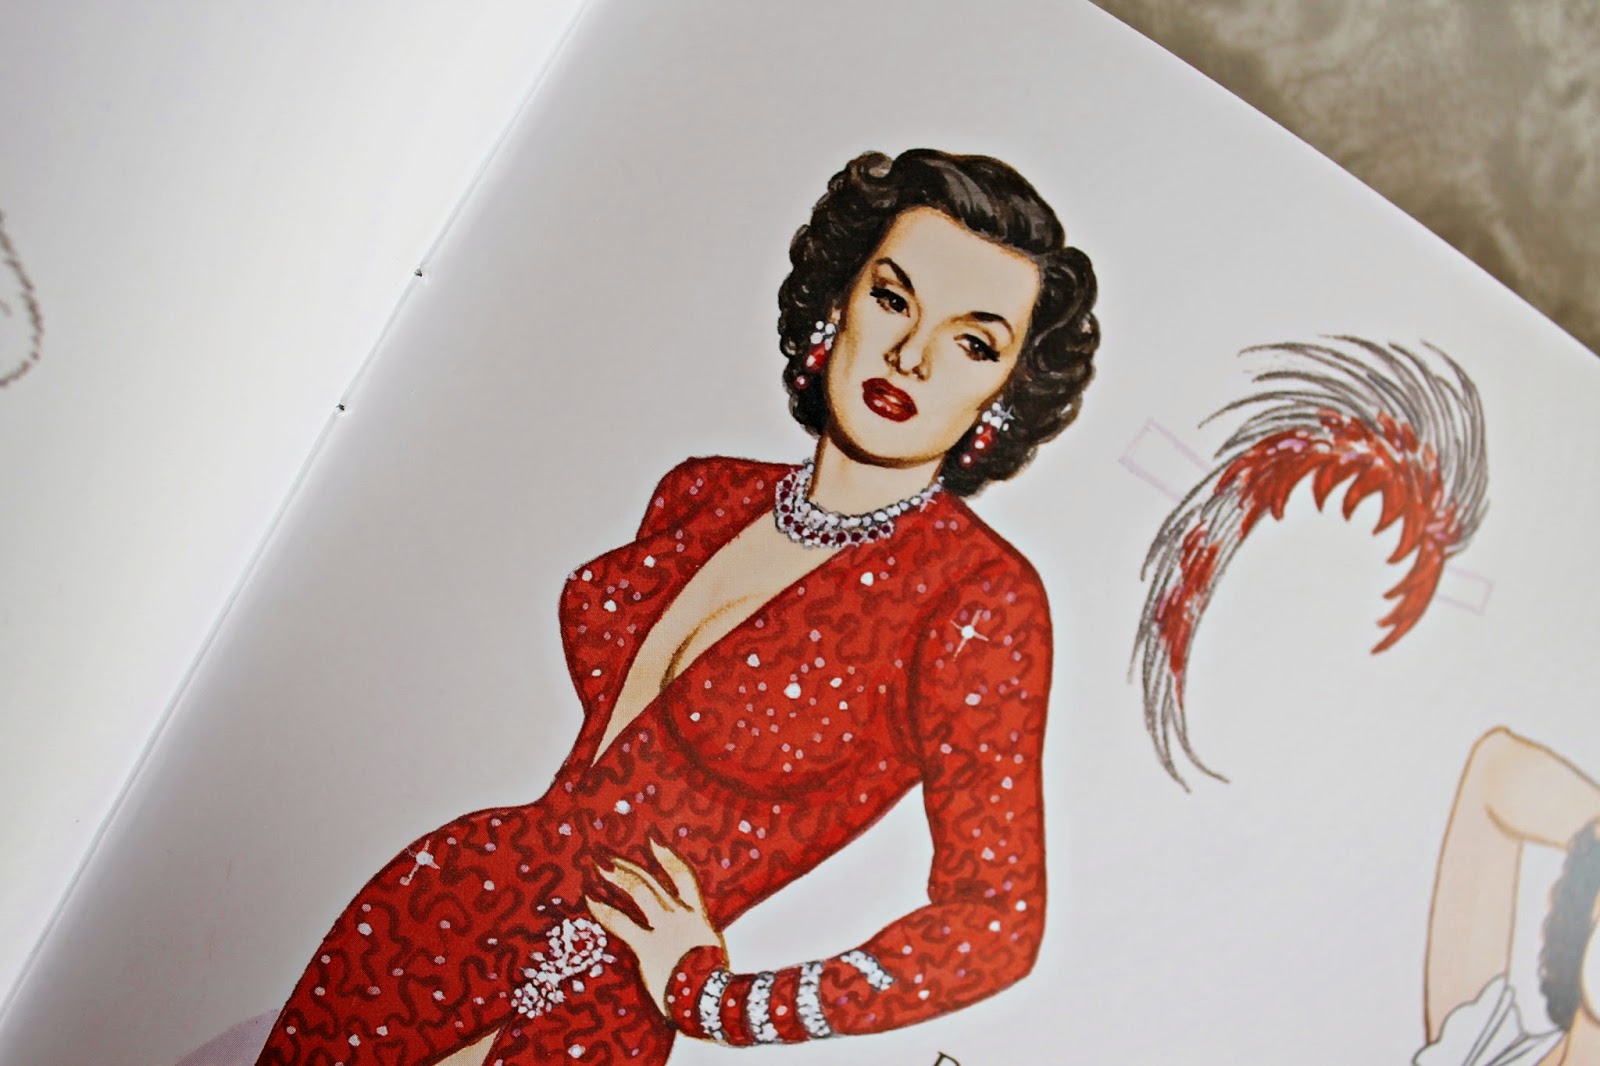 Glamorous Movie Stars of the 1950s paper dolls by Tom Tierney from Dover Publications